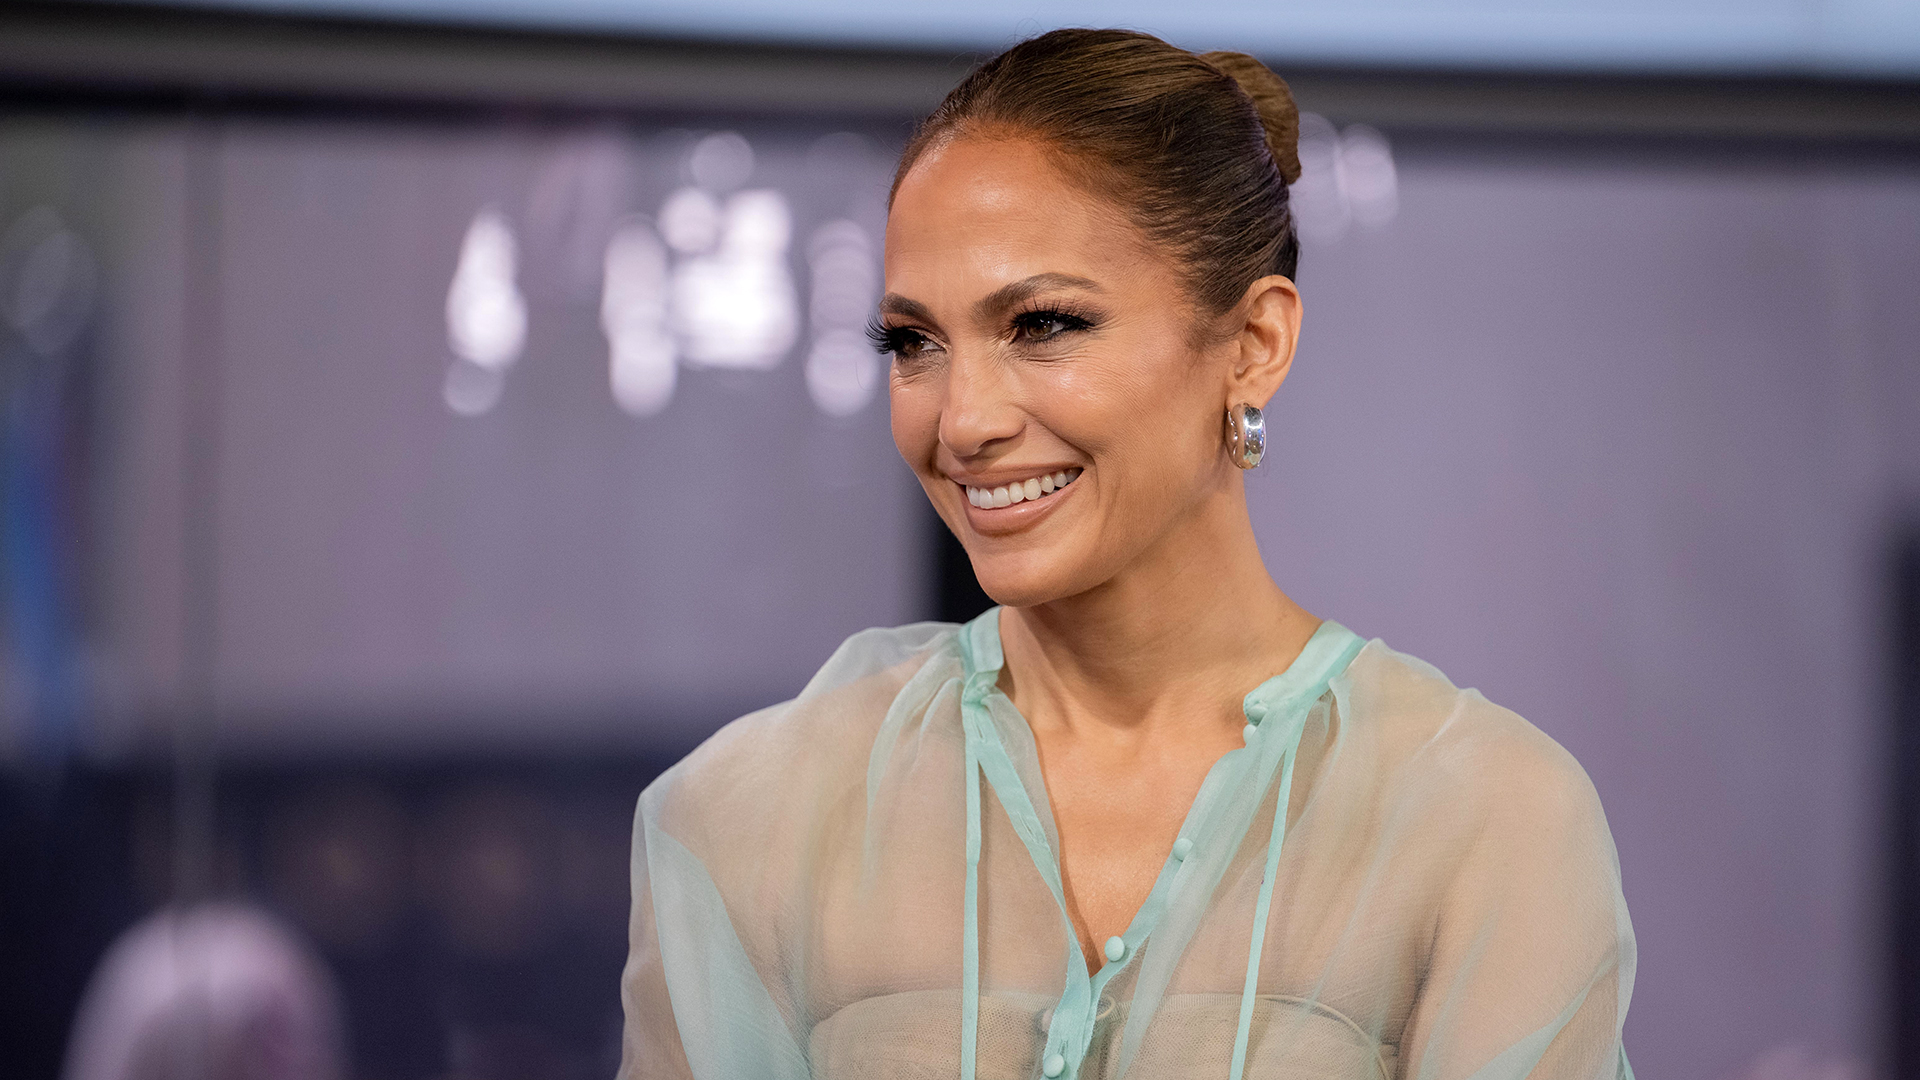 Watch: Jennifer Lopez Confirms There Will Be No Features on New ‘This Is Me…Now’ Album